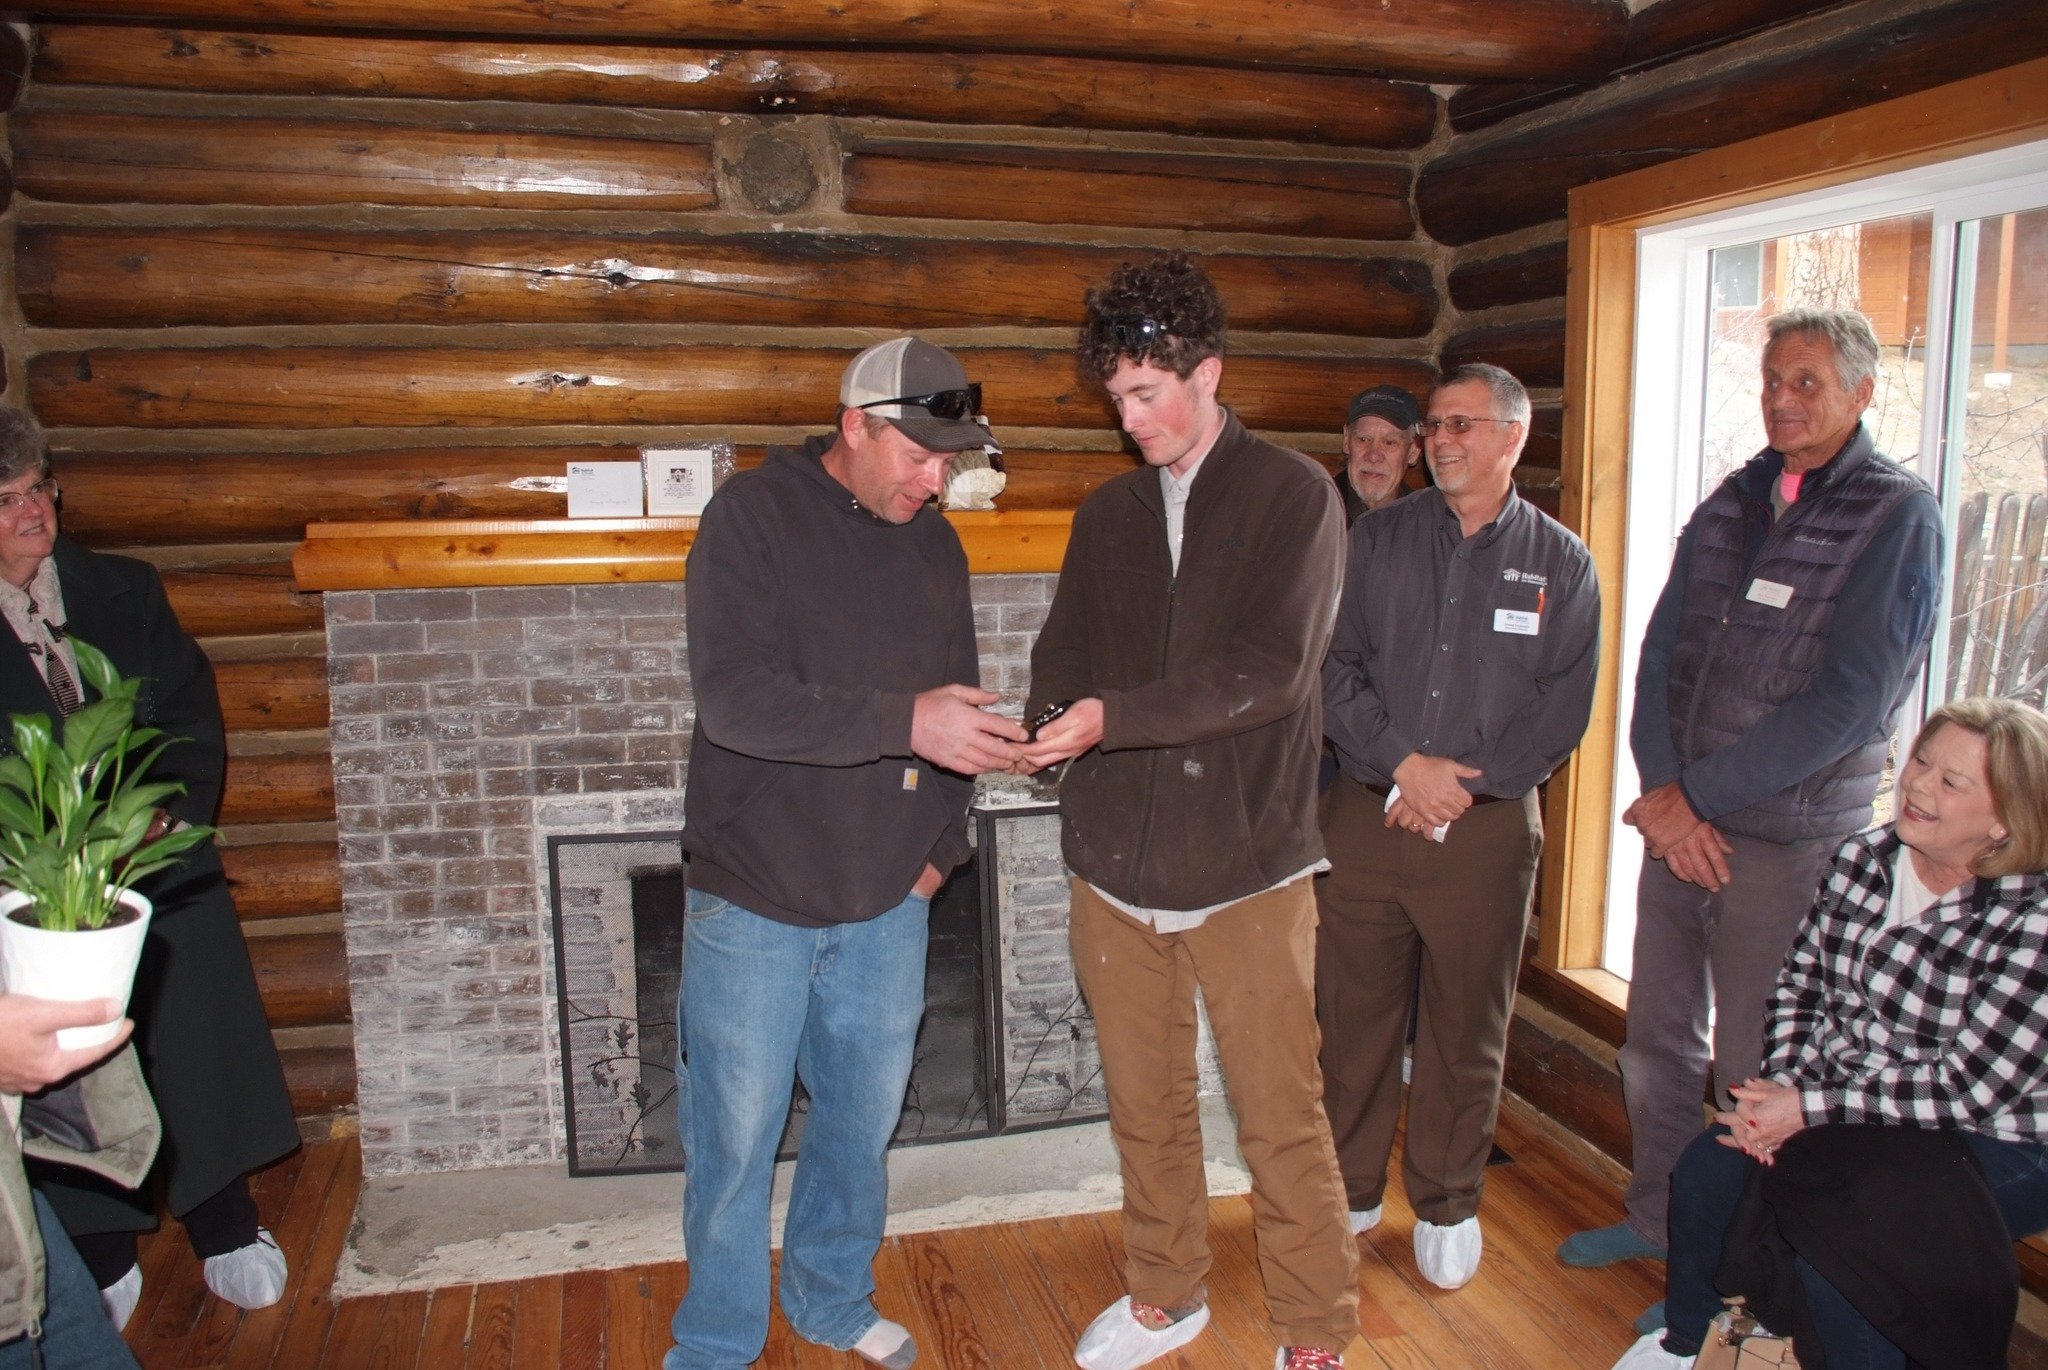 Thank you @longmont_leader for featuring St. Vrain Habitat in a recent article about our work in Estes Park. What a joyous occasion it was as we celebrated a cabin renovation. Habitat does more than build new homes. Our repair program helps individua